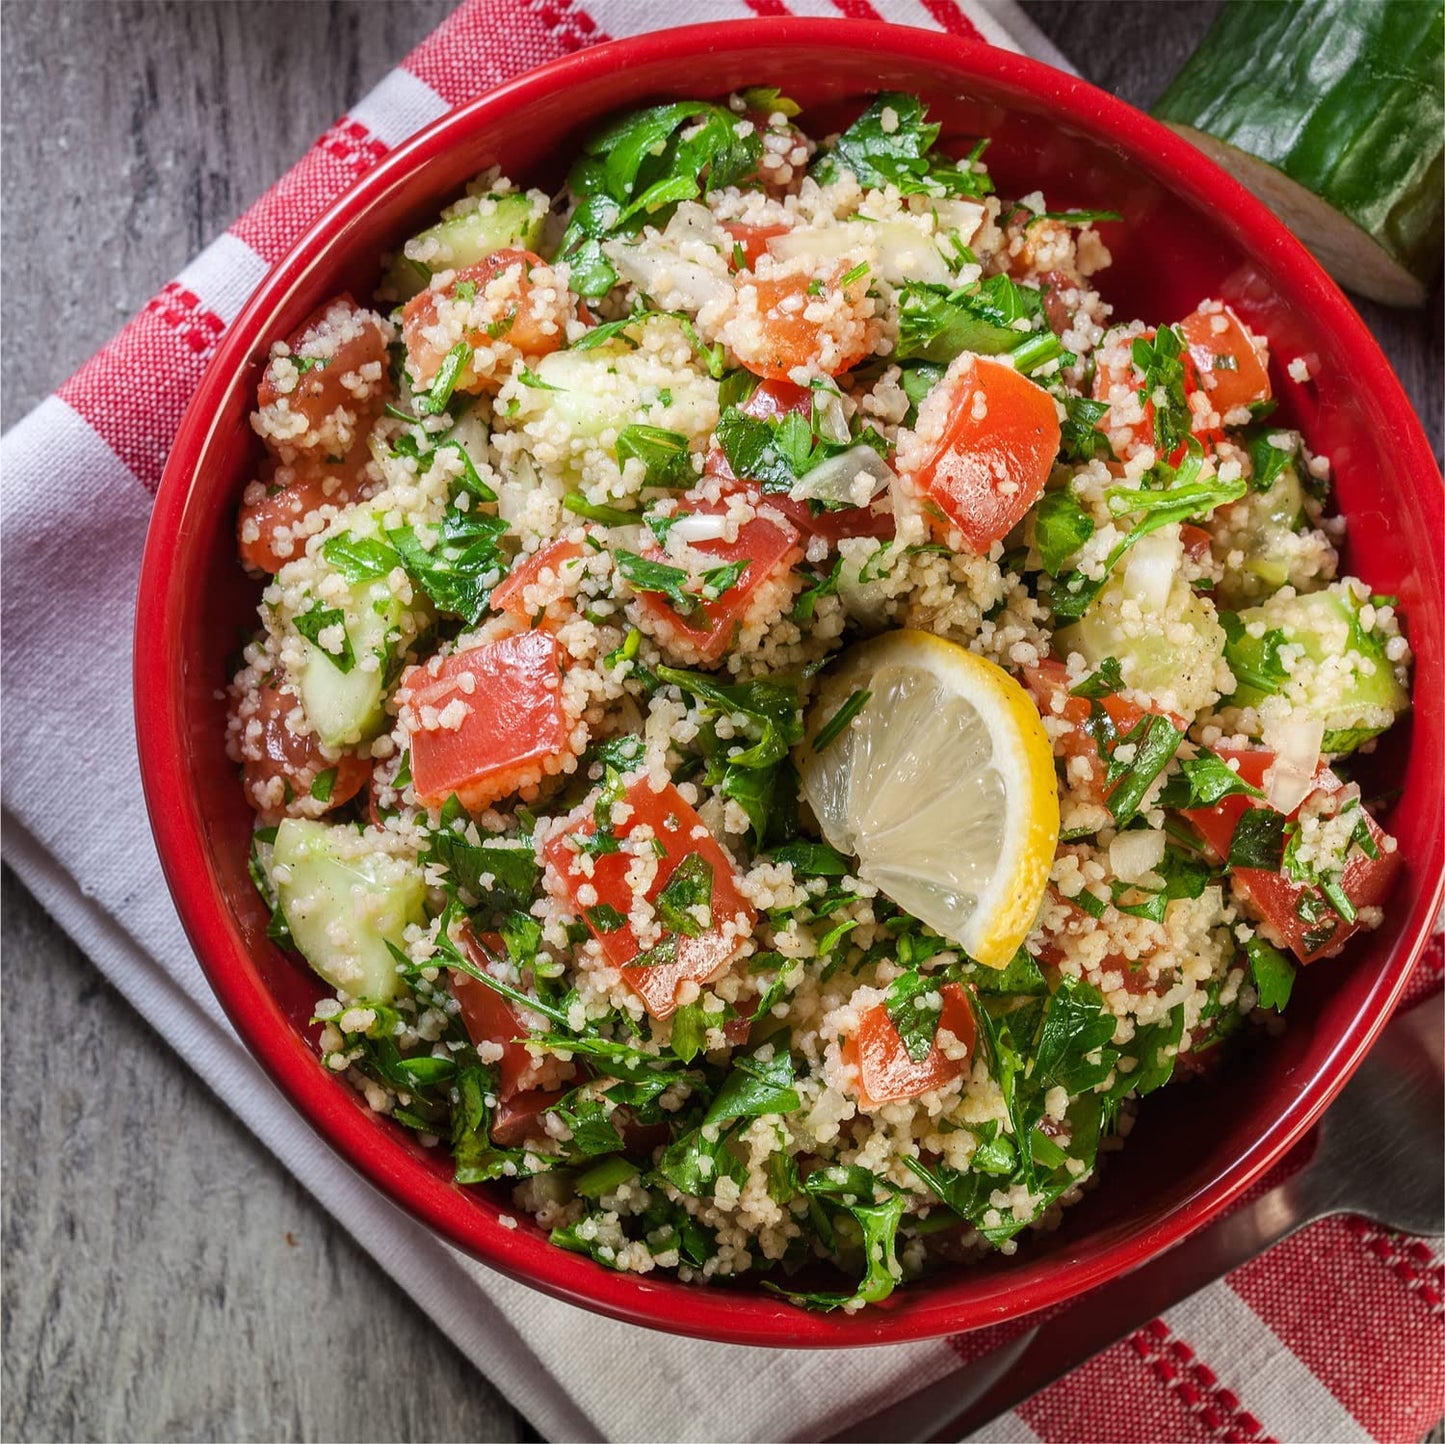 A red bowl filled with a salad made from fresh herbs, couscous and tomato with a half-lemon slice garnish.